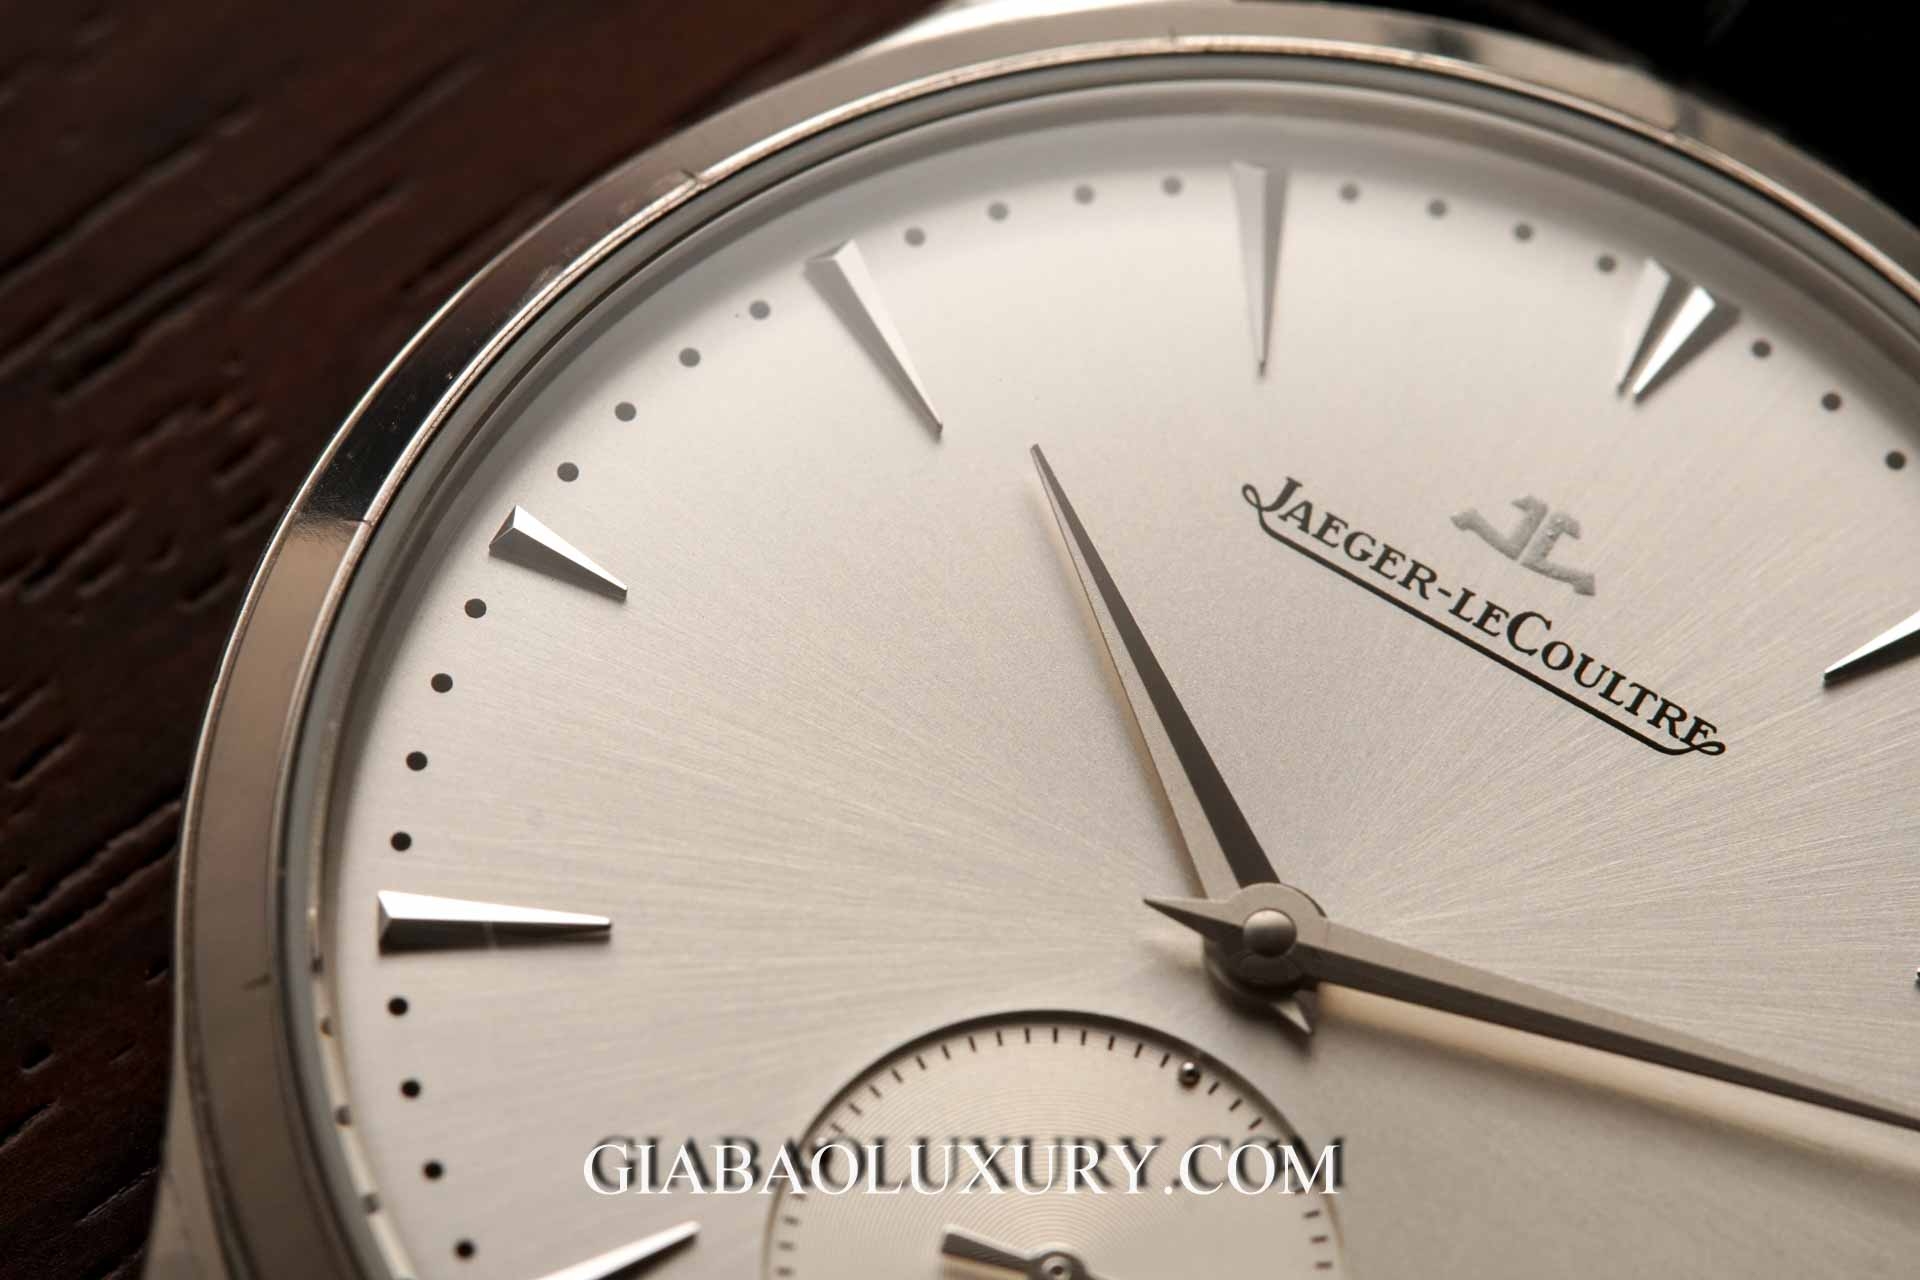 Đồng Hồ Jaeger-LeCoultre Master Ultra Thin Small Second Q1358420